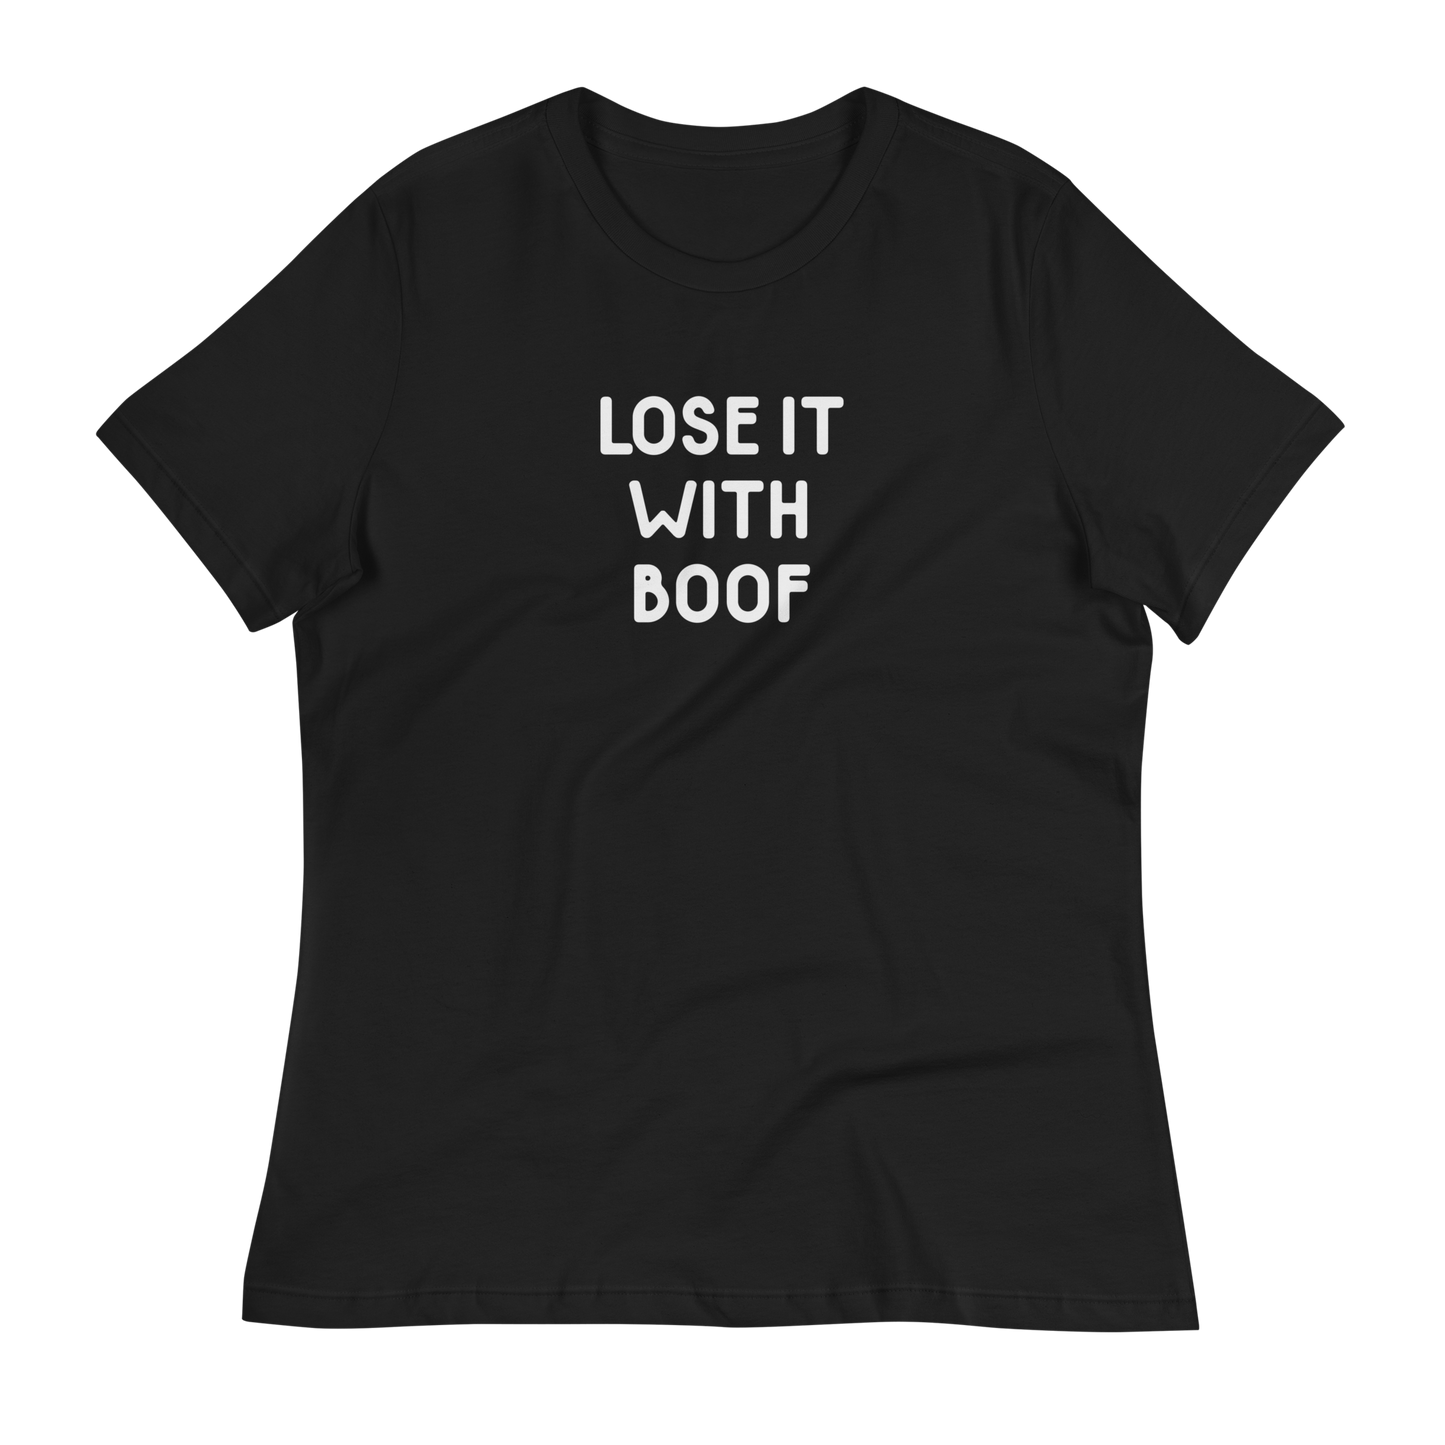 Lose It With Boof Relaxed Fit T-Shirt